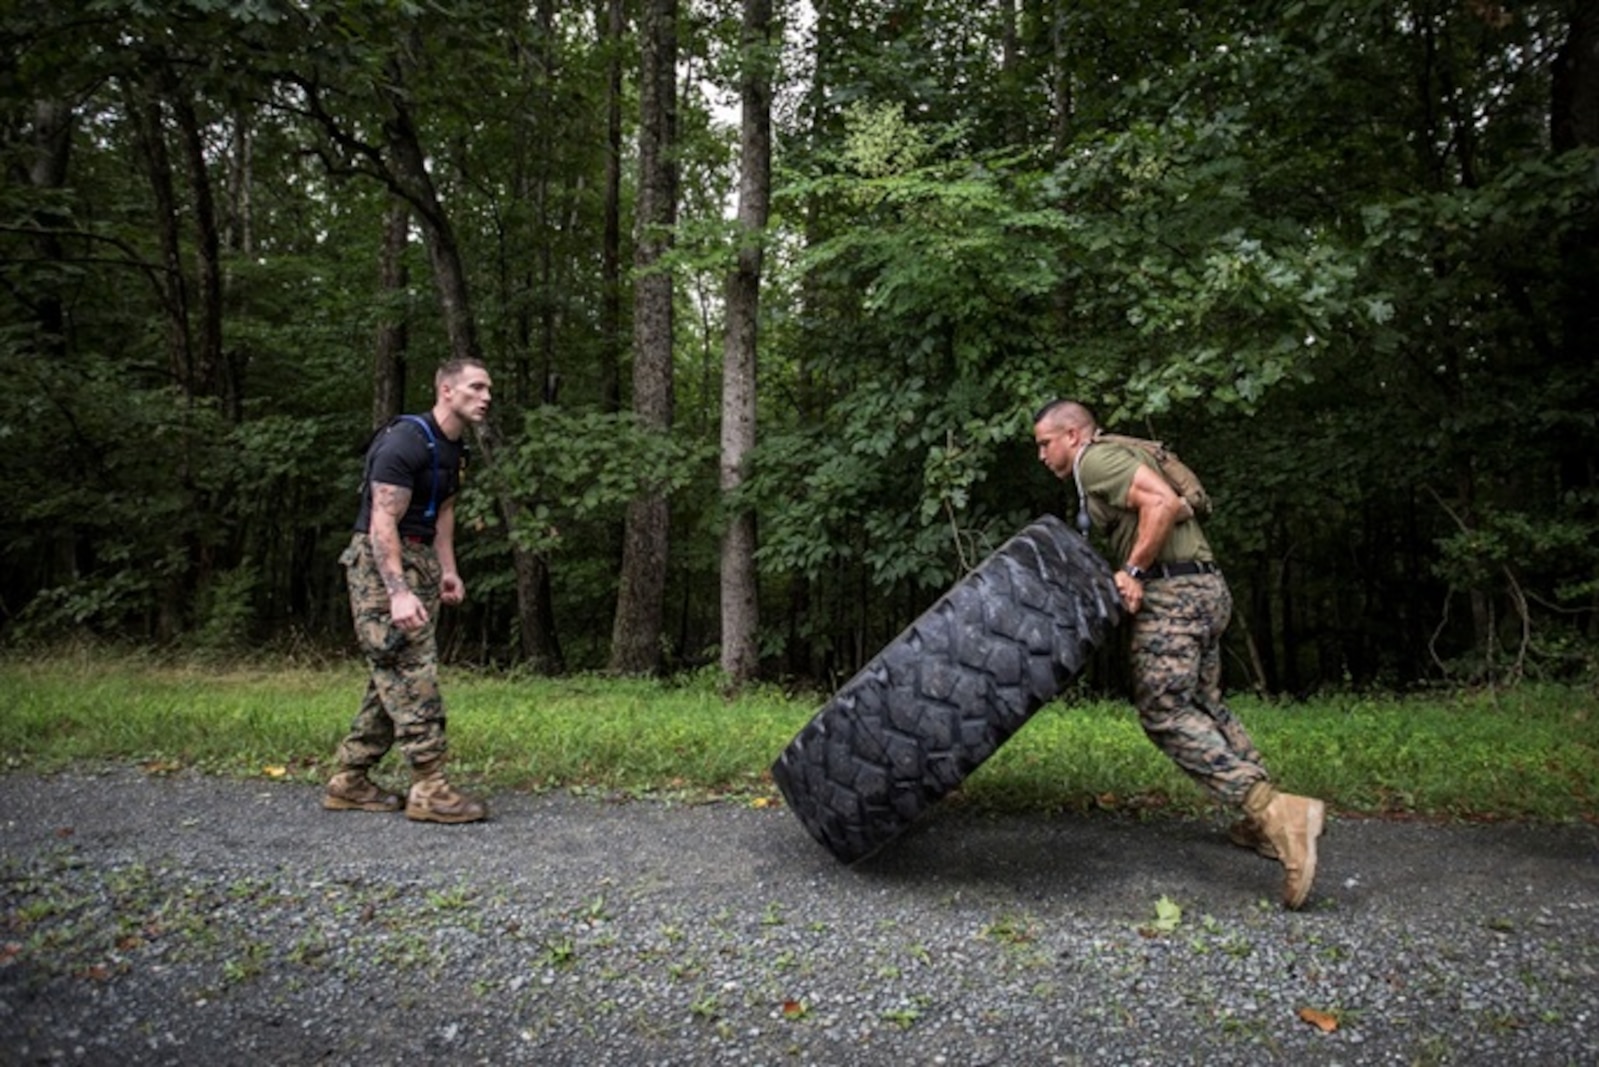 FFIT Sgt. Cody Anderson monitors form and motivates a Marine executed a tire flip during a Physical Training session as part of Force Fitness Instructor Course 4-17.